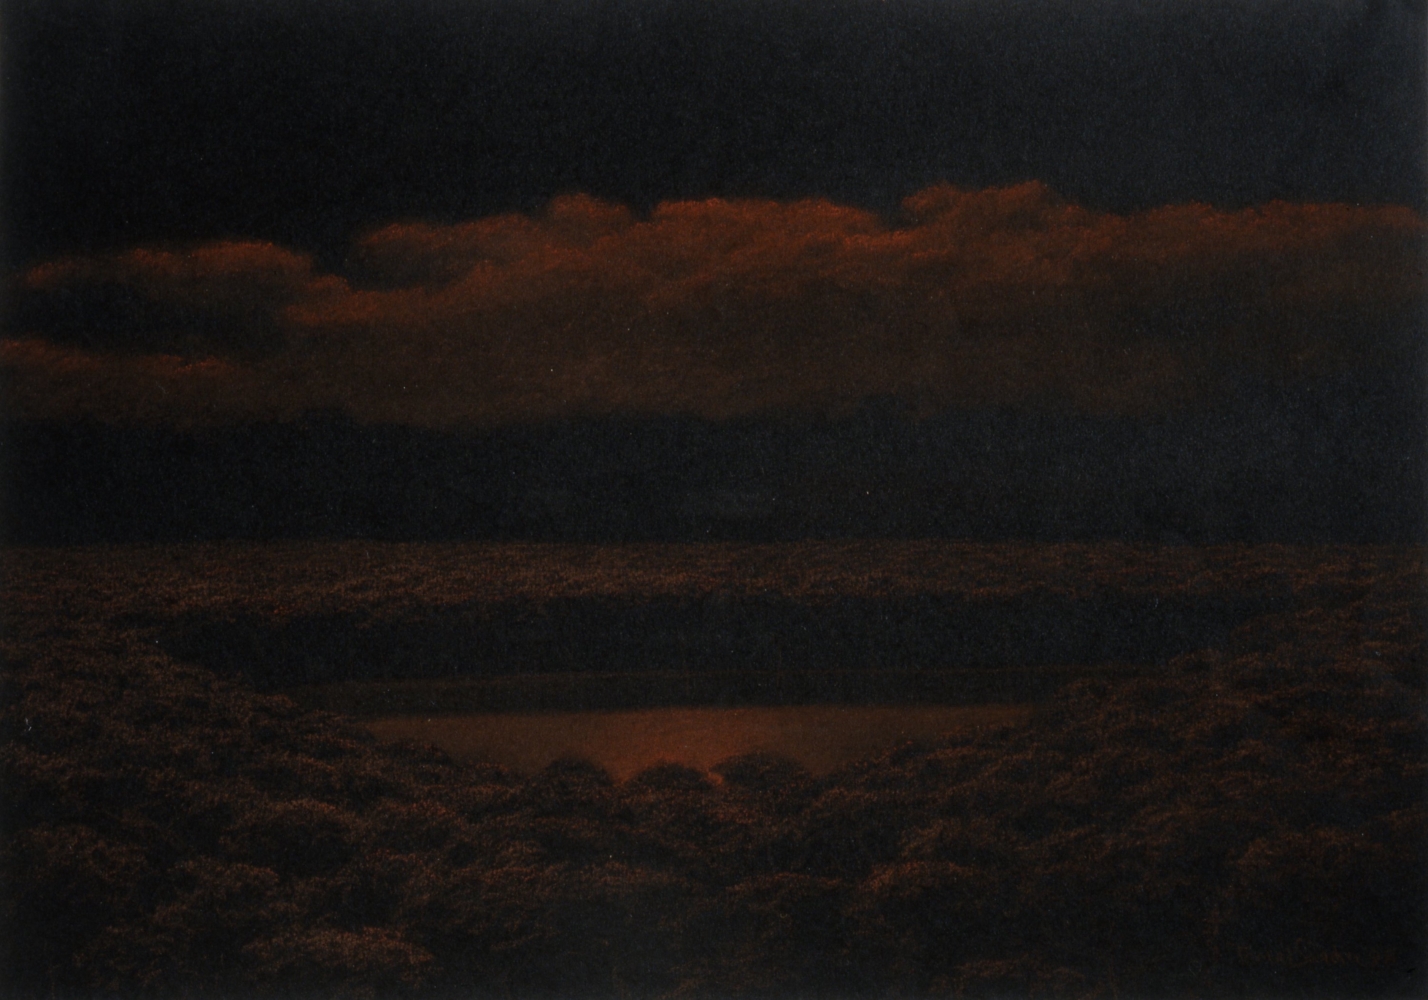 Tom&amp;aacute;s S&amp;aacute;nchez
Laguna (no. 46), 1998
cont&amp;eacute; on black paper
11 3/4&amp;times; 16 1/2 in. / 29.8 &amp;times; 41.9 cm